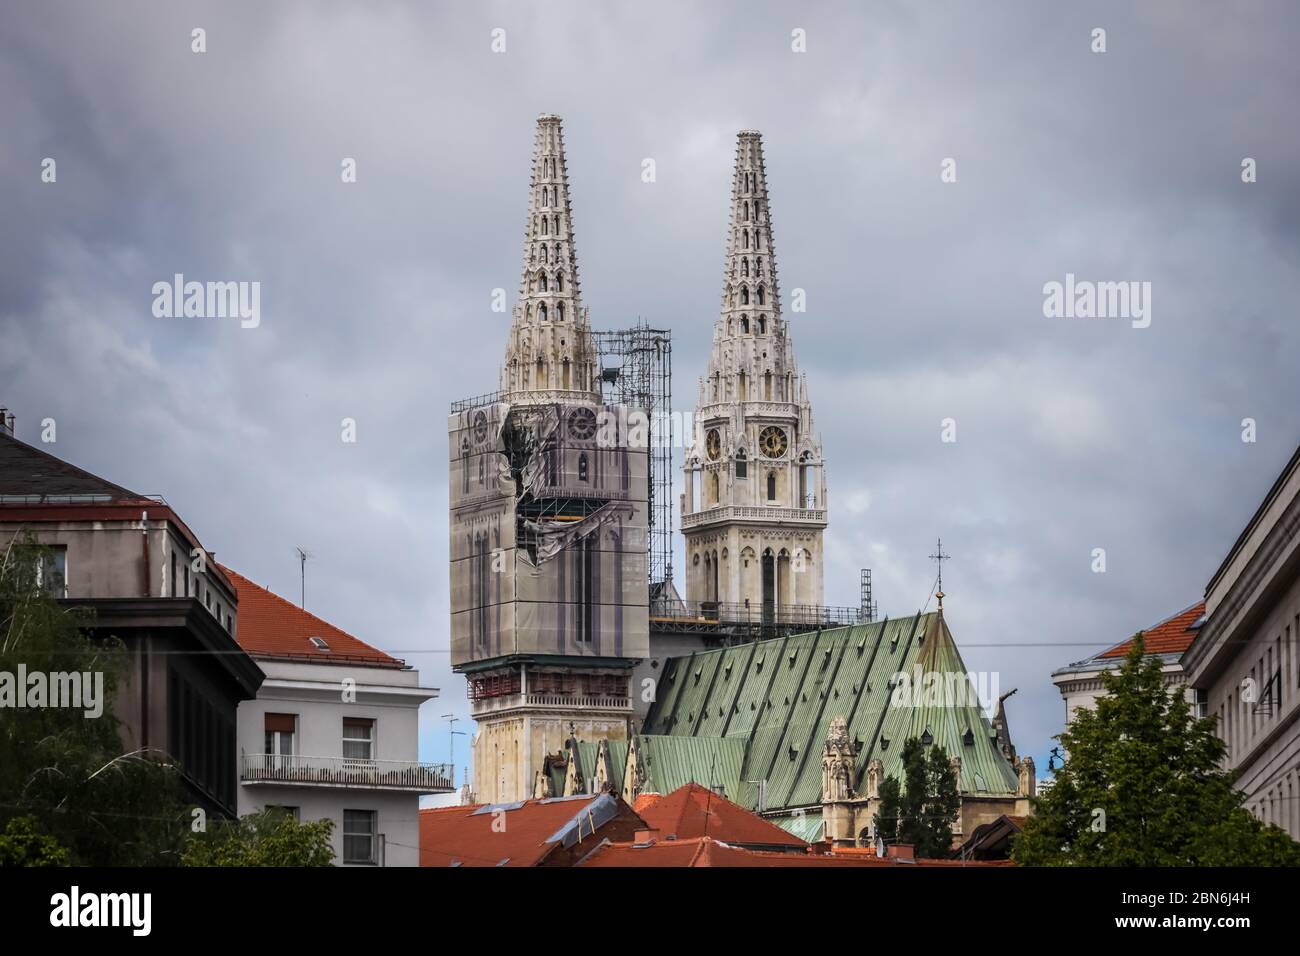 Zagreb, Croatia - 15 April, 2020 : The Zagreb cathedral without both crosses on the top of the towers after earthquake that have damage it in Zagreb, Stock Photo